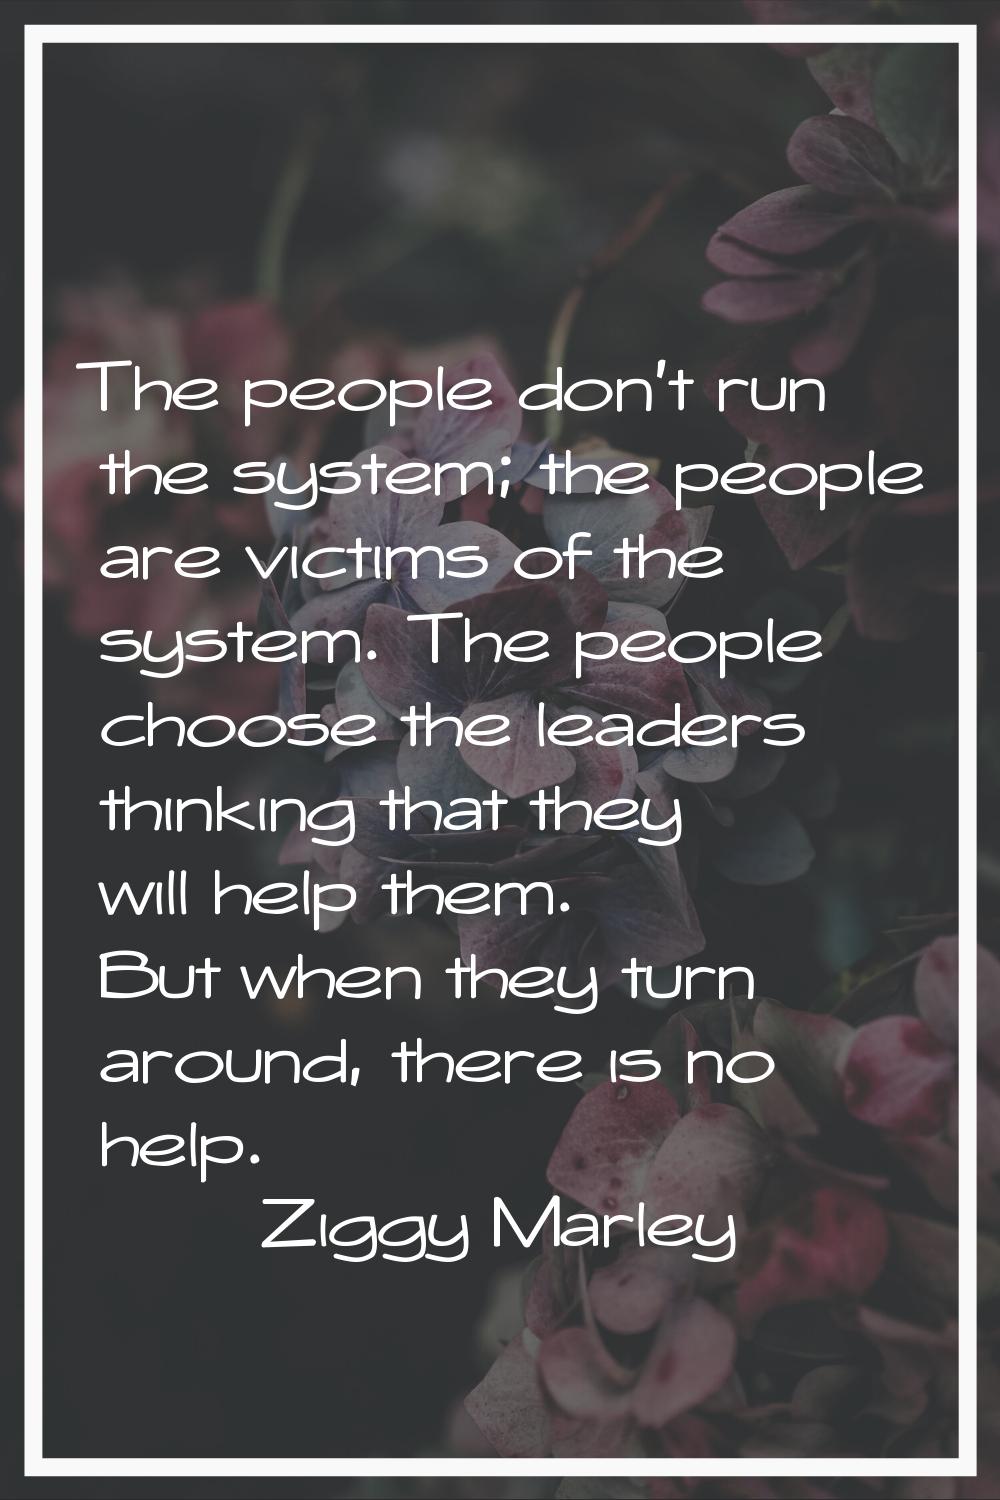 The people don't run the system; the people are victims of the system. The people choose the leader